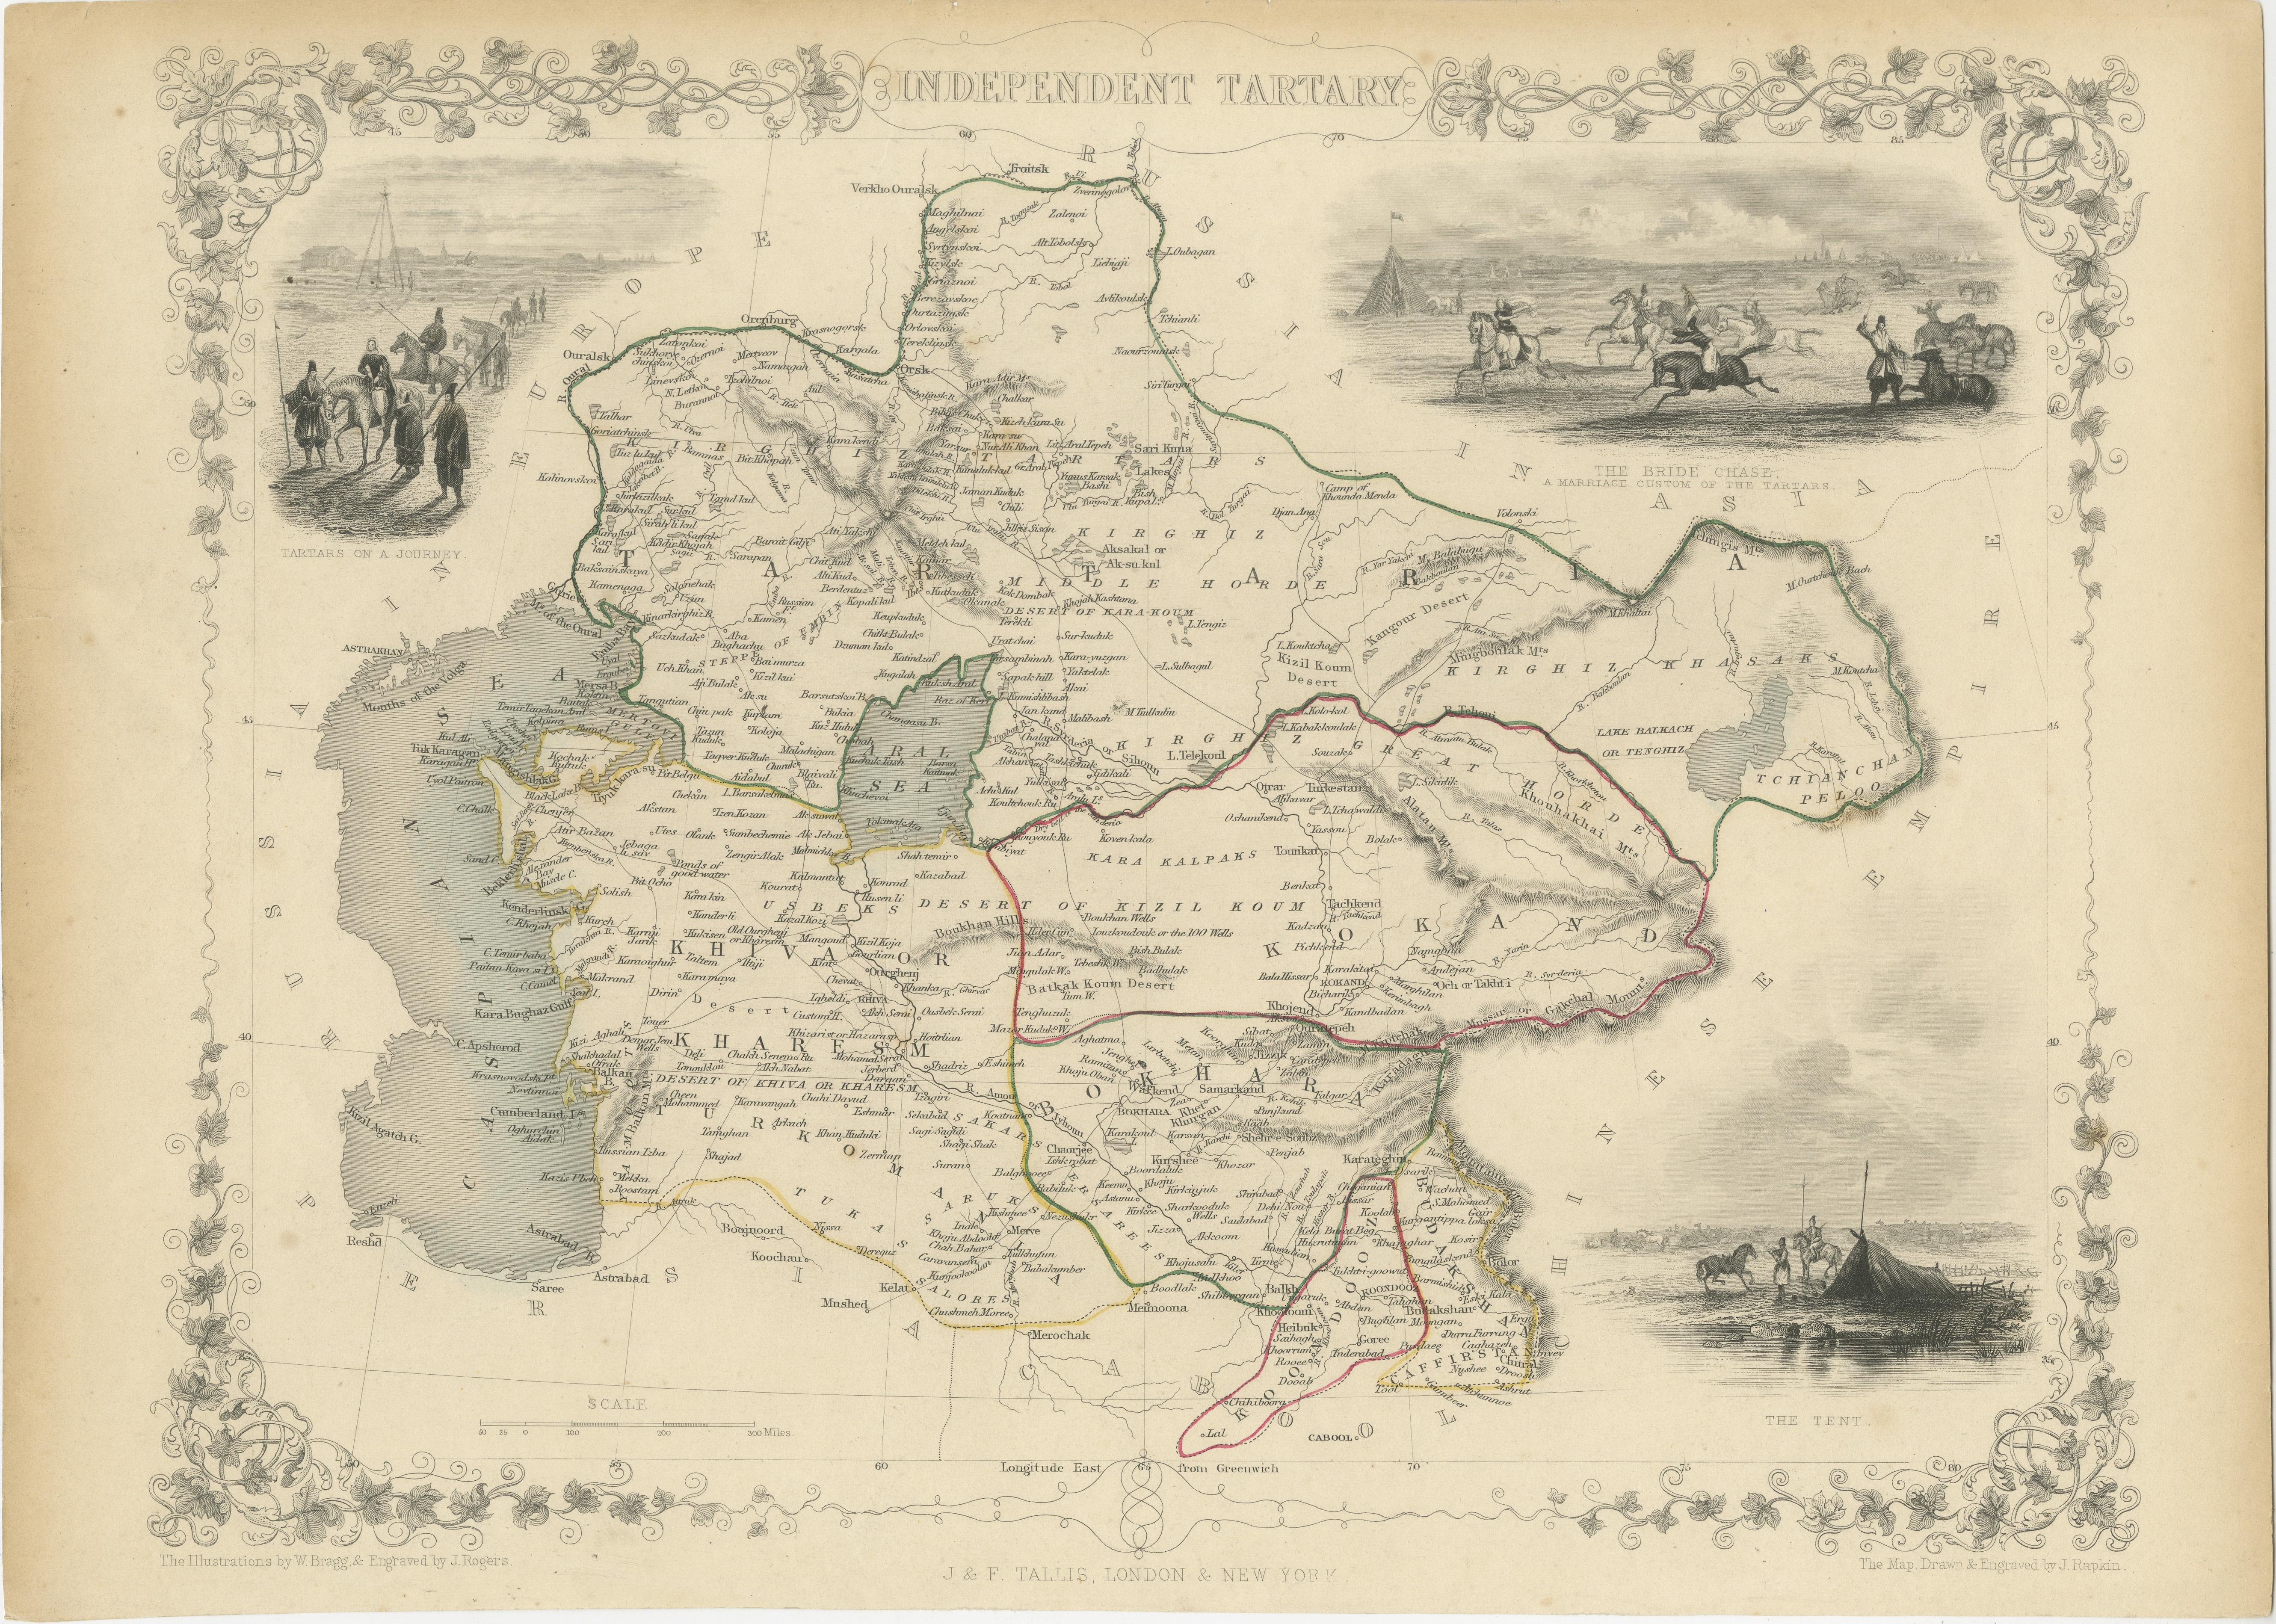 Antique map titled 'Independent Tartary'. Original steel engraved map of Central Asia. It covers the regions between the Caspian Sea and Lake Balkhash and between Russia and Afghanistan. These include the ancient Silk Route kingdoms of Khiva,